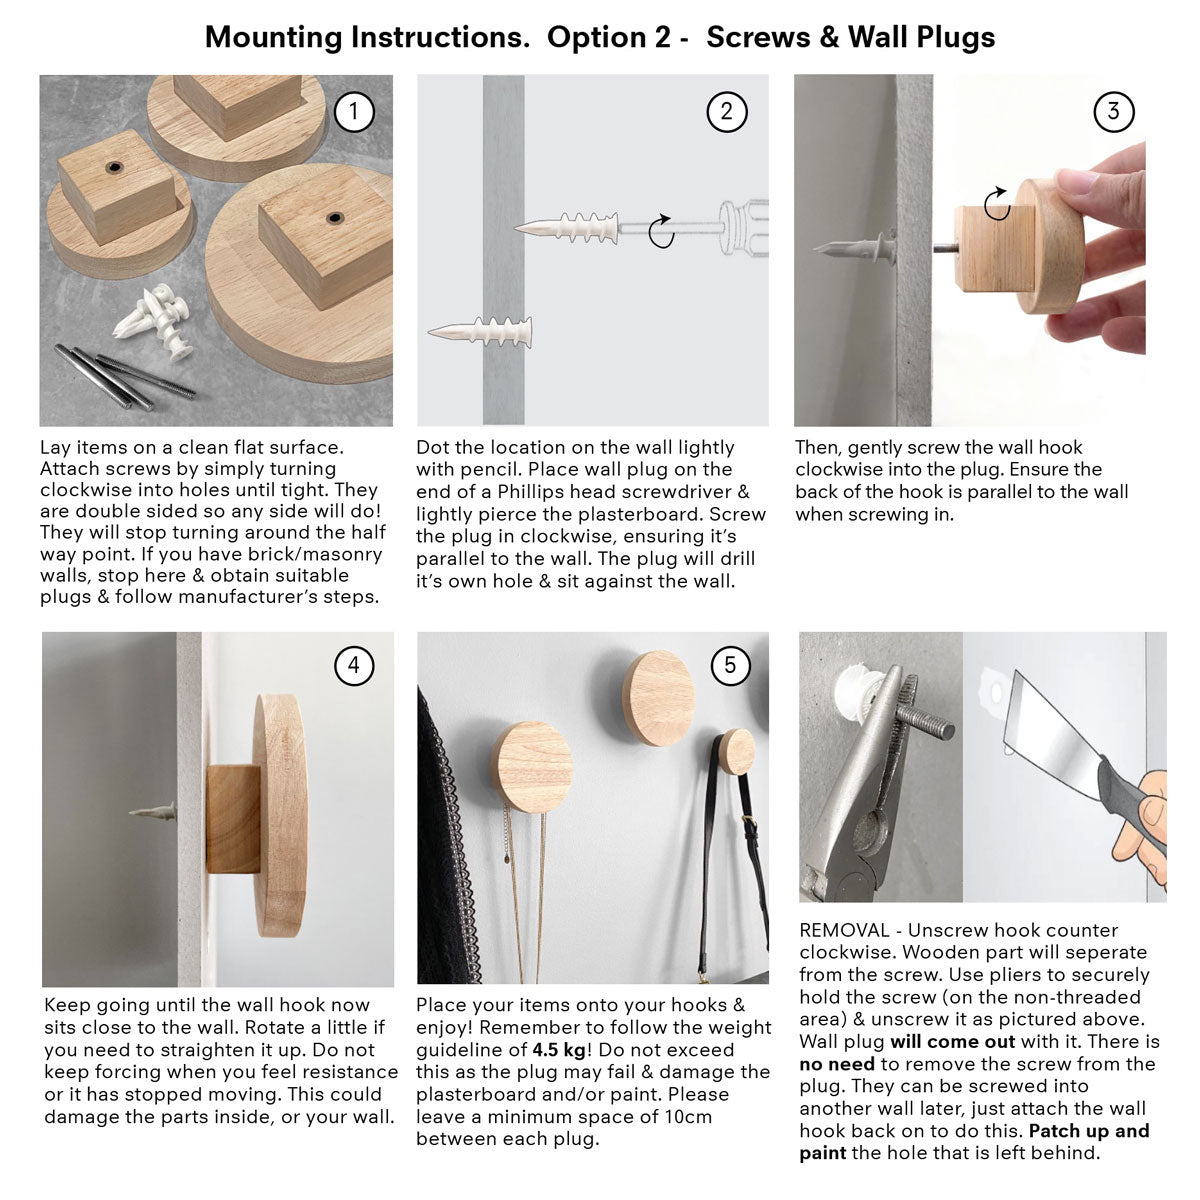 Round oak wall hooks mounting option 2 instructions, for fixed screws & plugs going into plasterboard